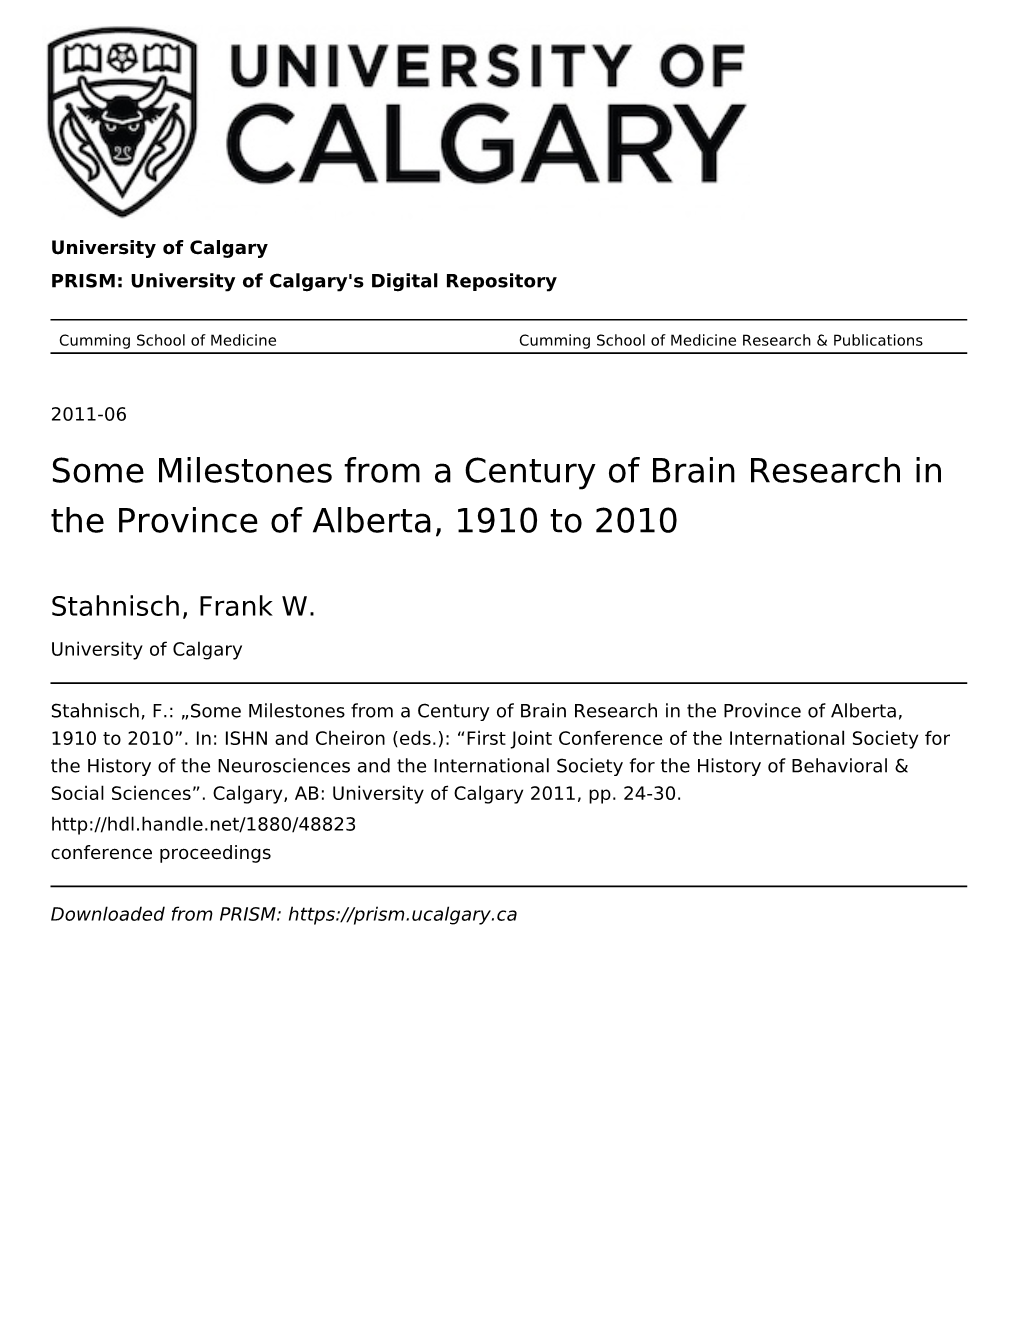 Some Milestones from a Century of Brain Research in the Province of Alberta, 1910 to 2010